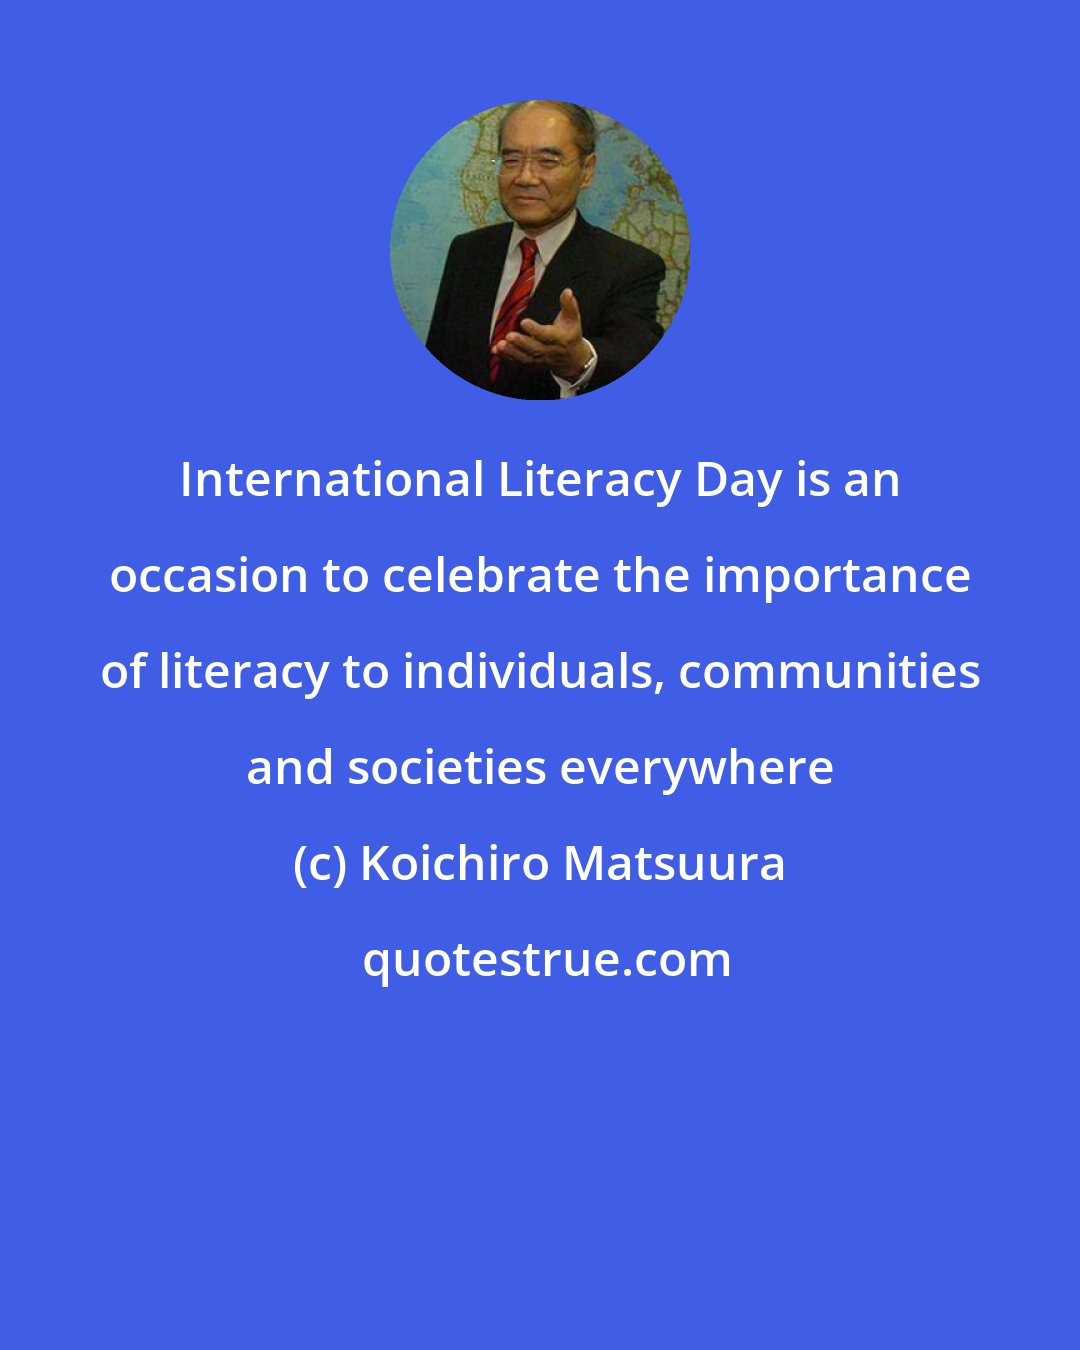 Koichiro Matsuura: International Literacy Day is an occasion to celebrate the importance of literacy to individuals, communities and societies everywhere